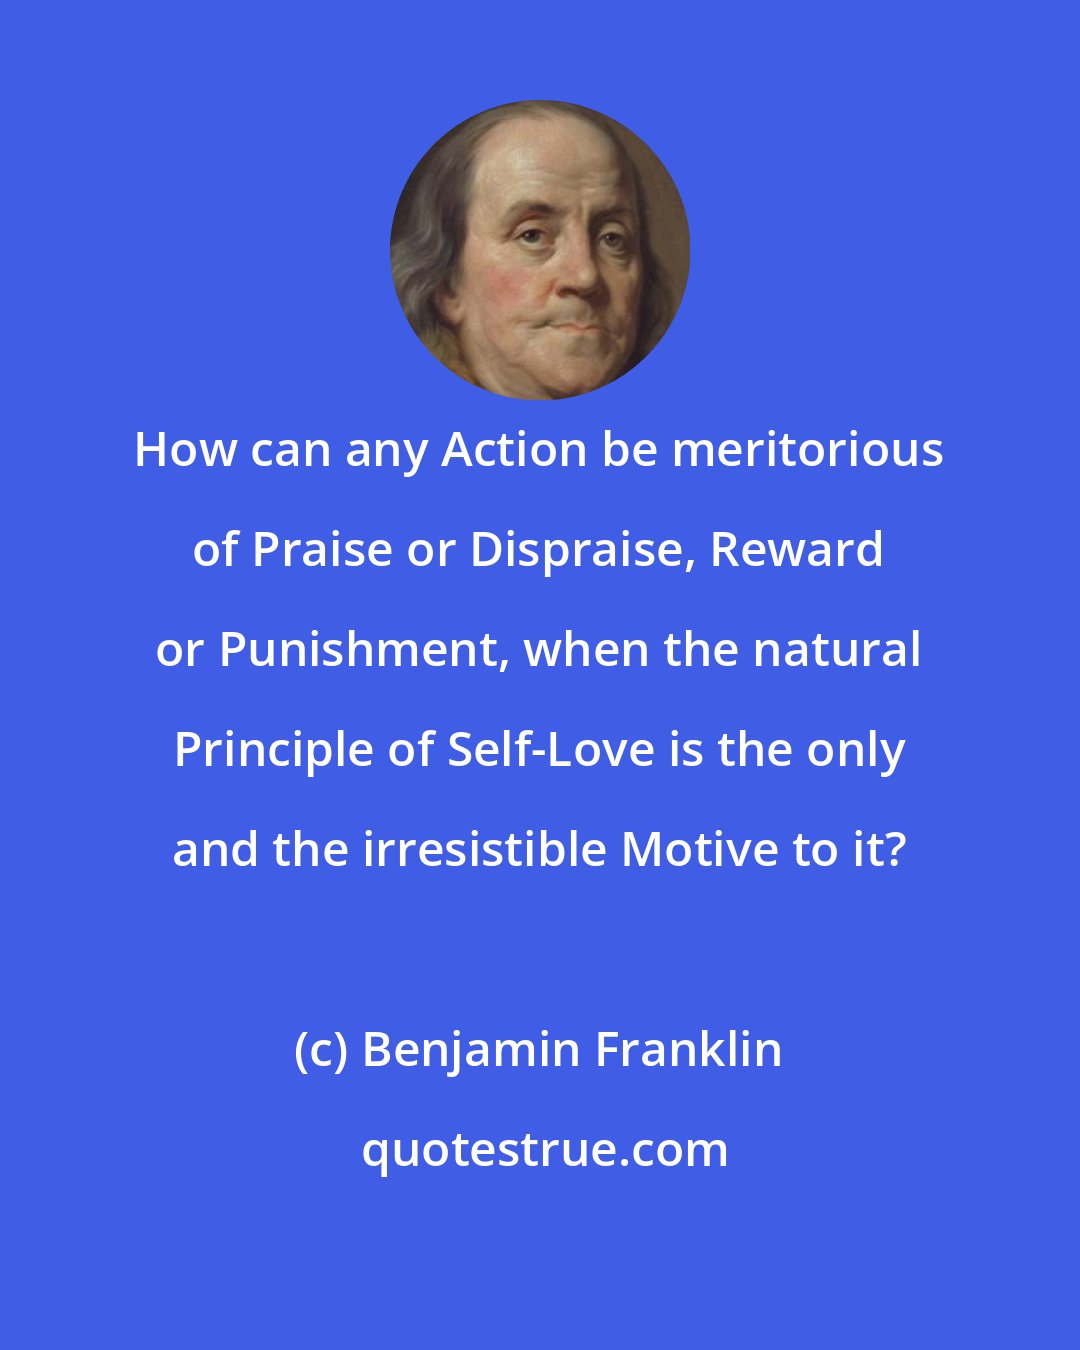 Benjamin Franklin: How can any Action be meritorious of Praise or Dispraise, Reward or Punishment, when the natural Principle of Self-Love is the only and the irresistible Motive to it?